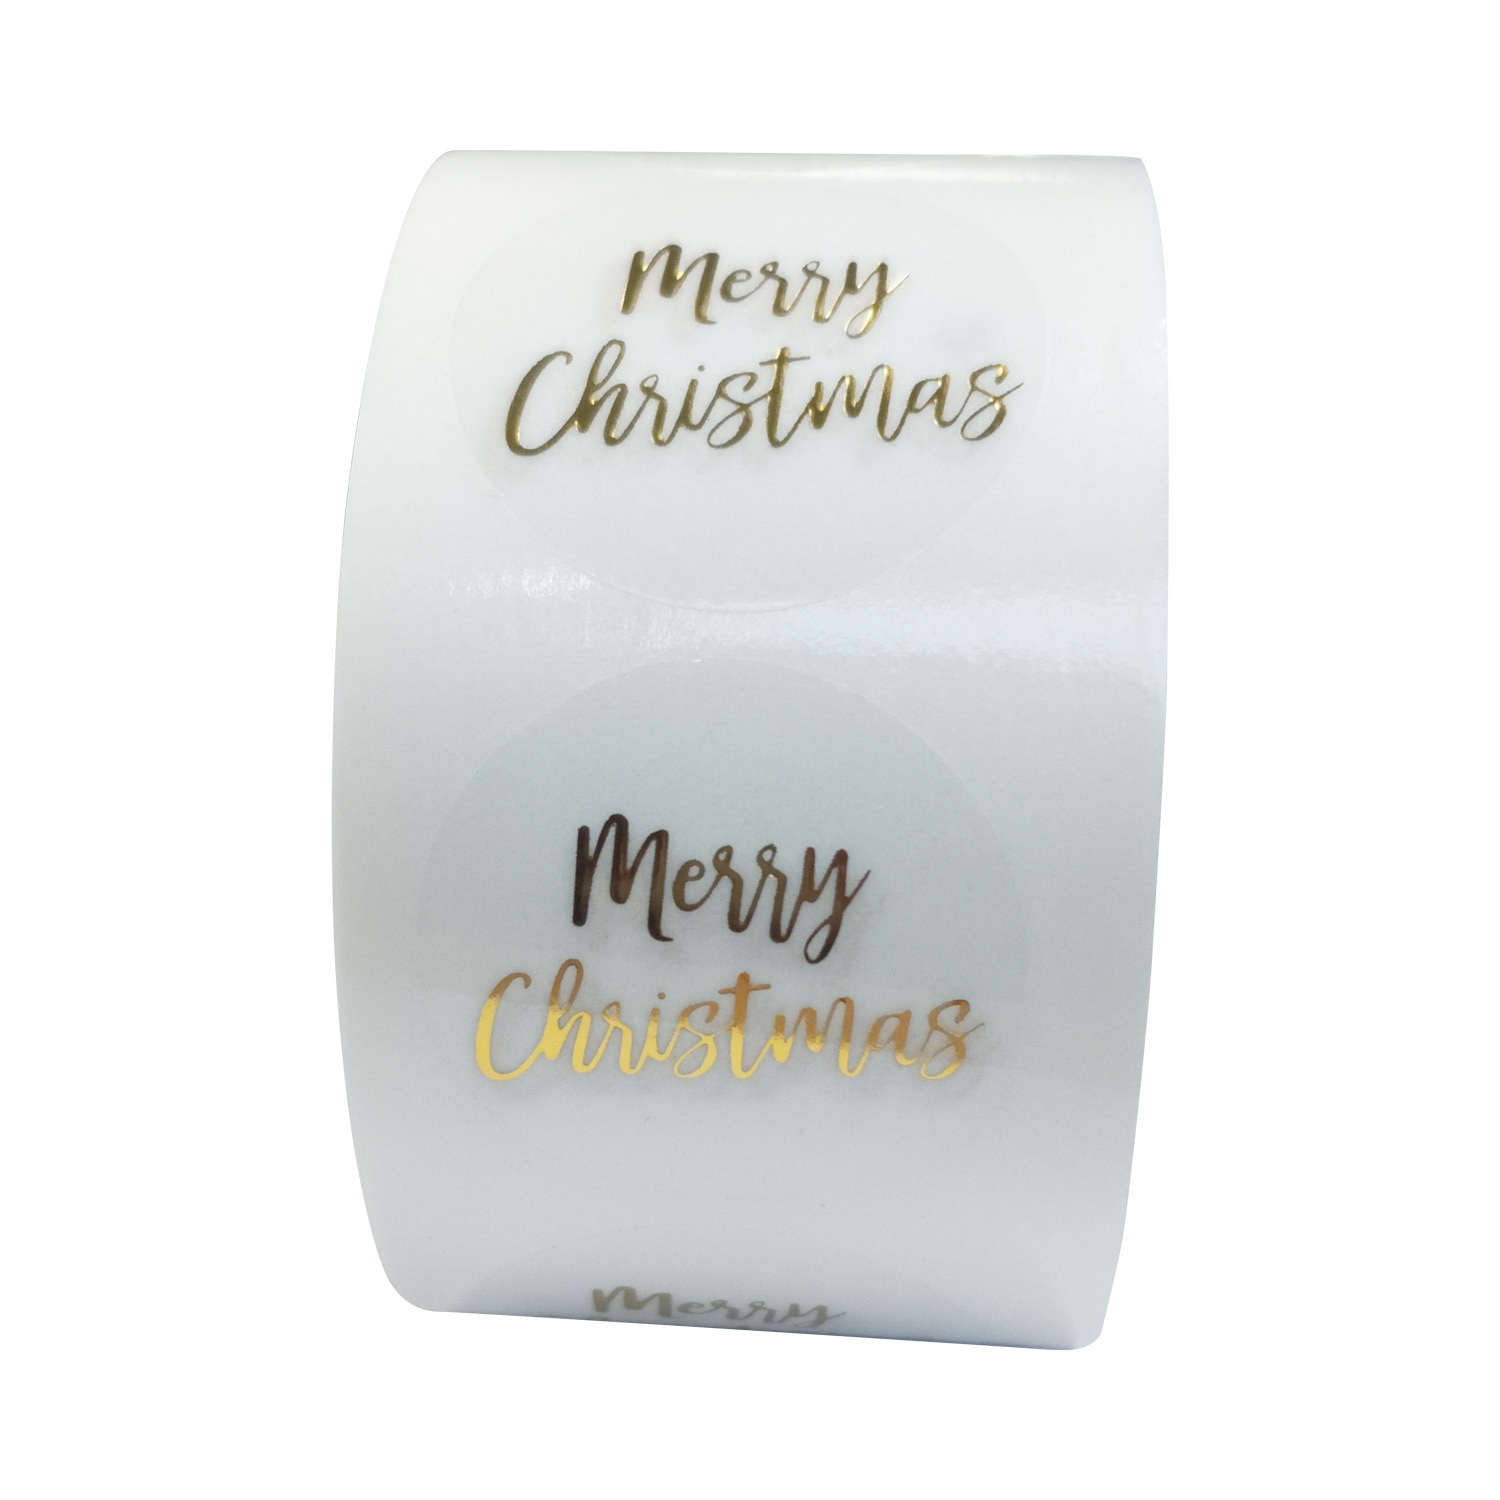 100-500pcs Round Clear Merry Christmas Stickers Thank You Card Box Package Label Sealing Stickers Wedding Decor Stationery